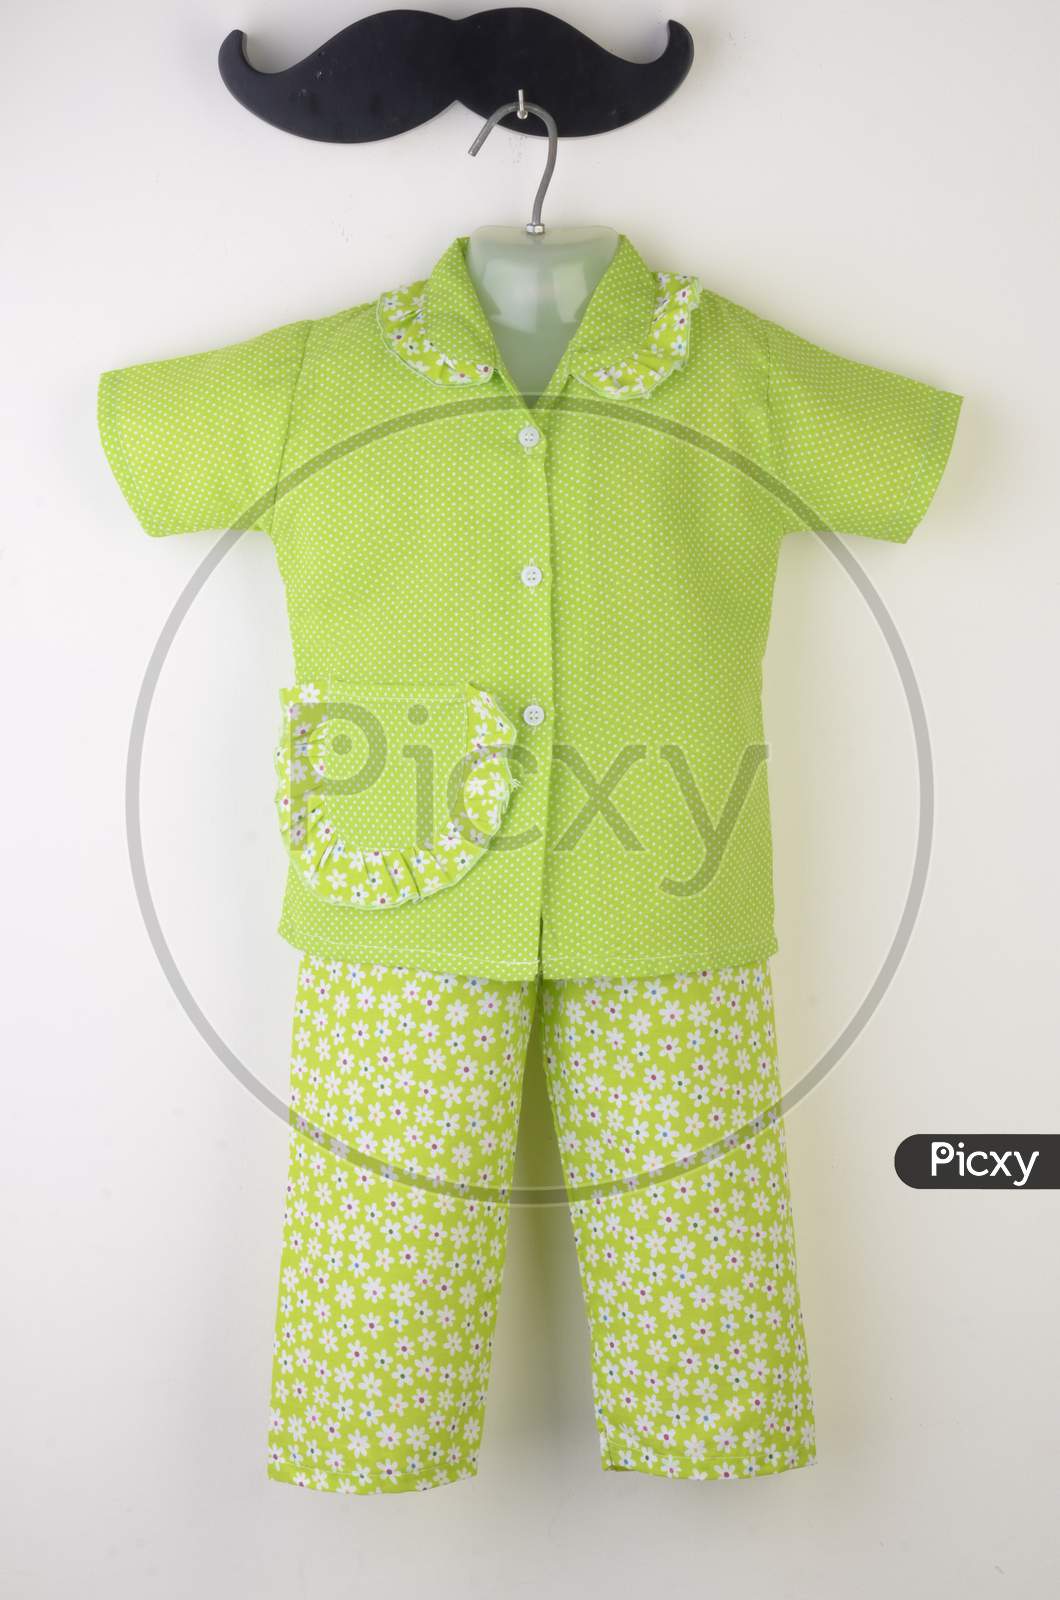 Kids Night Wear Paijama Over An Isolated White Background